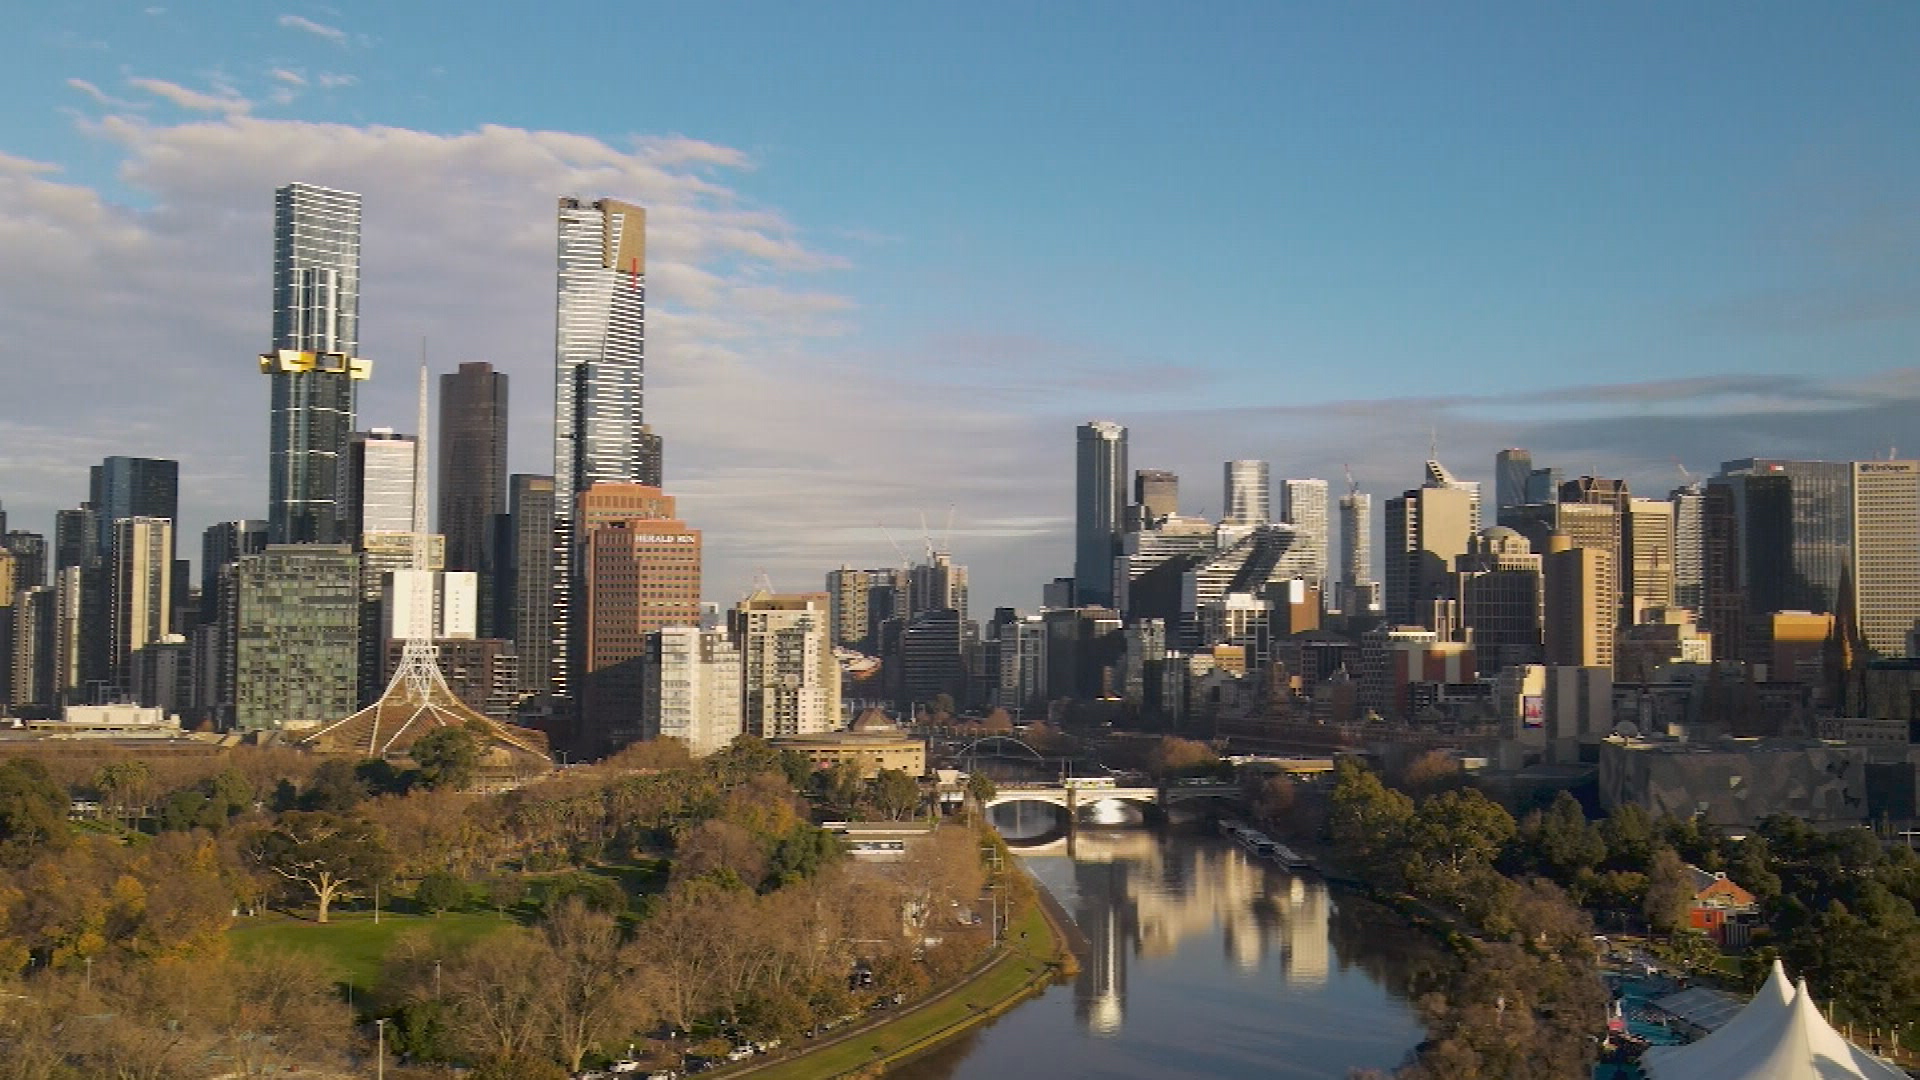 Melbourne crowned number one domestic tourist destination